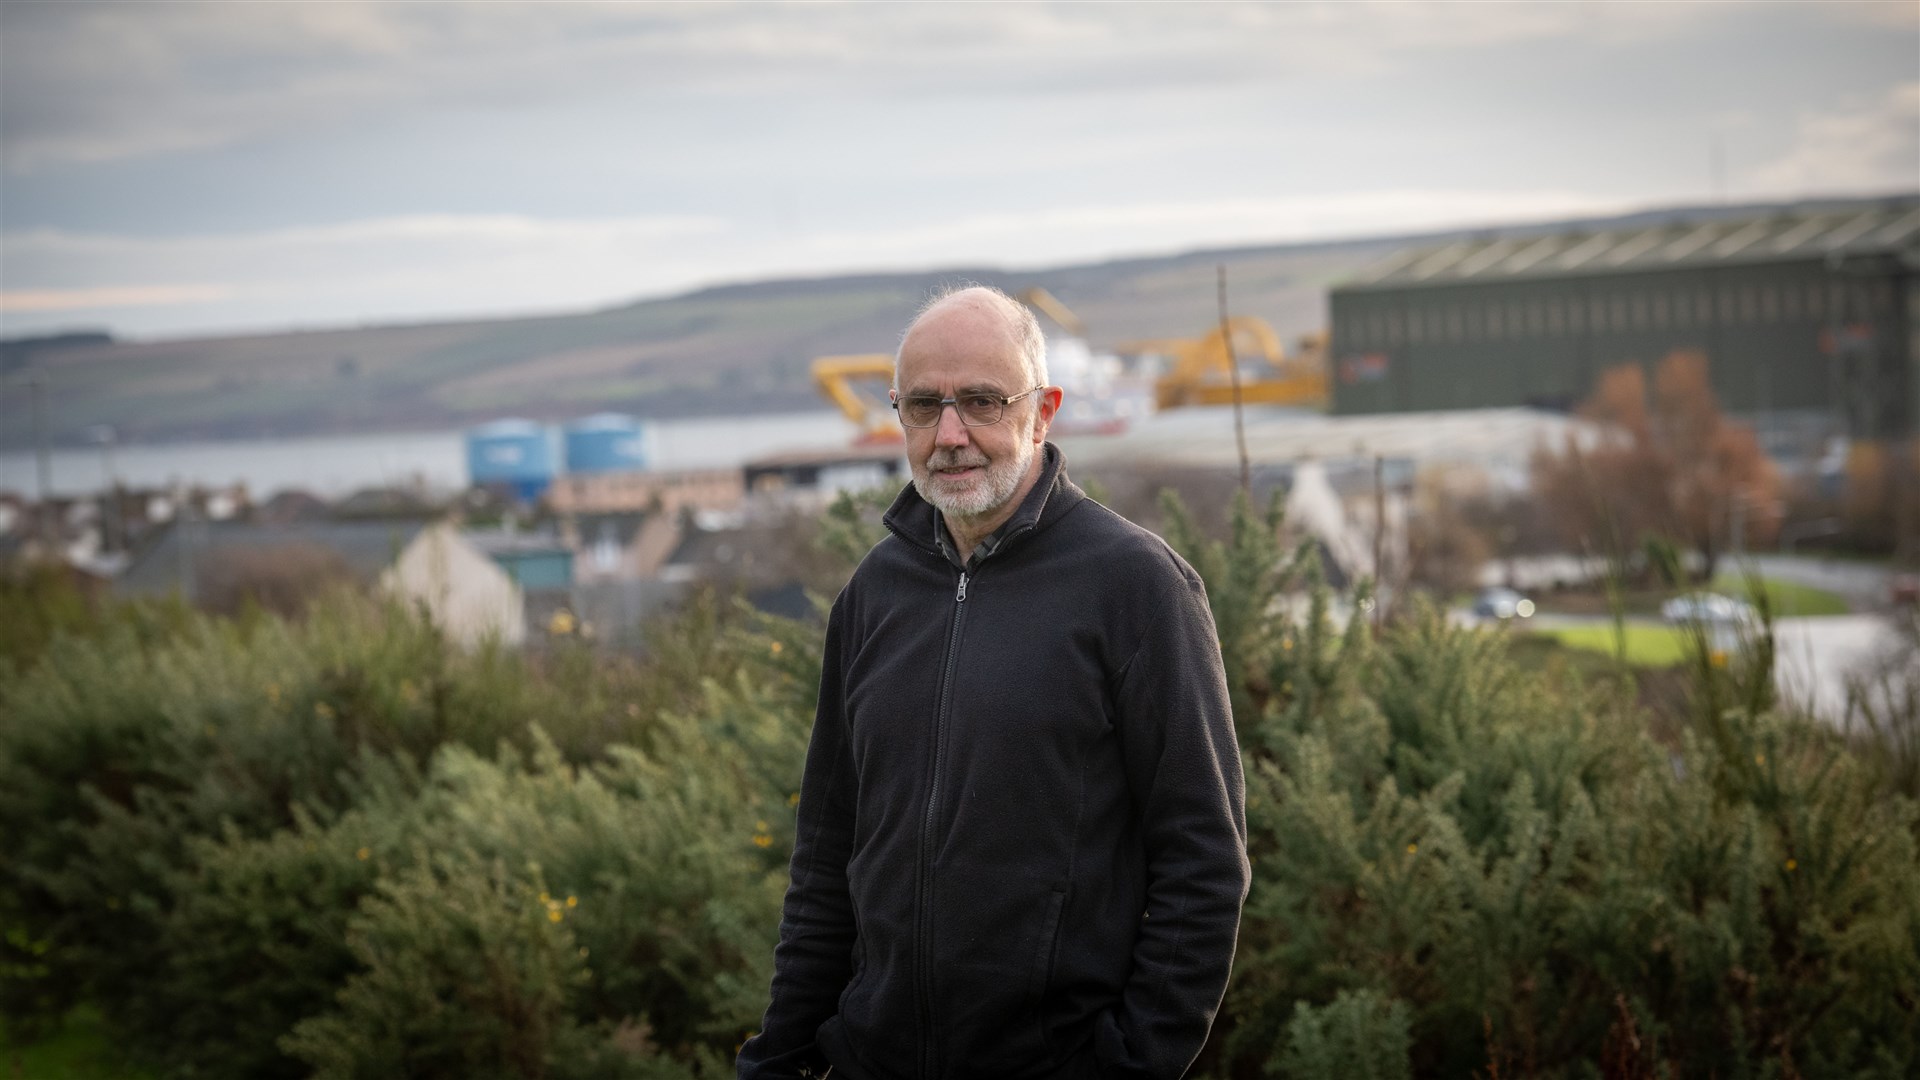 John McHardy: 'Being part of the community council has given me an opportunity to give something back to the community, working with like-minded people to manage the community fund and work on a range of projects.' Picture: Callum Mackay